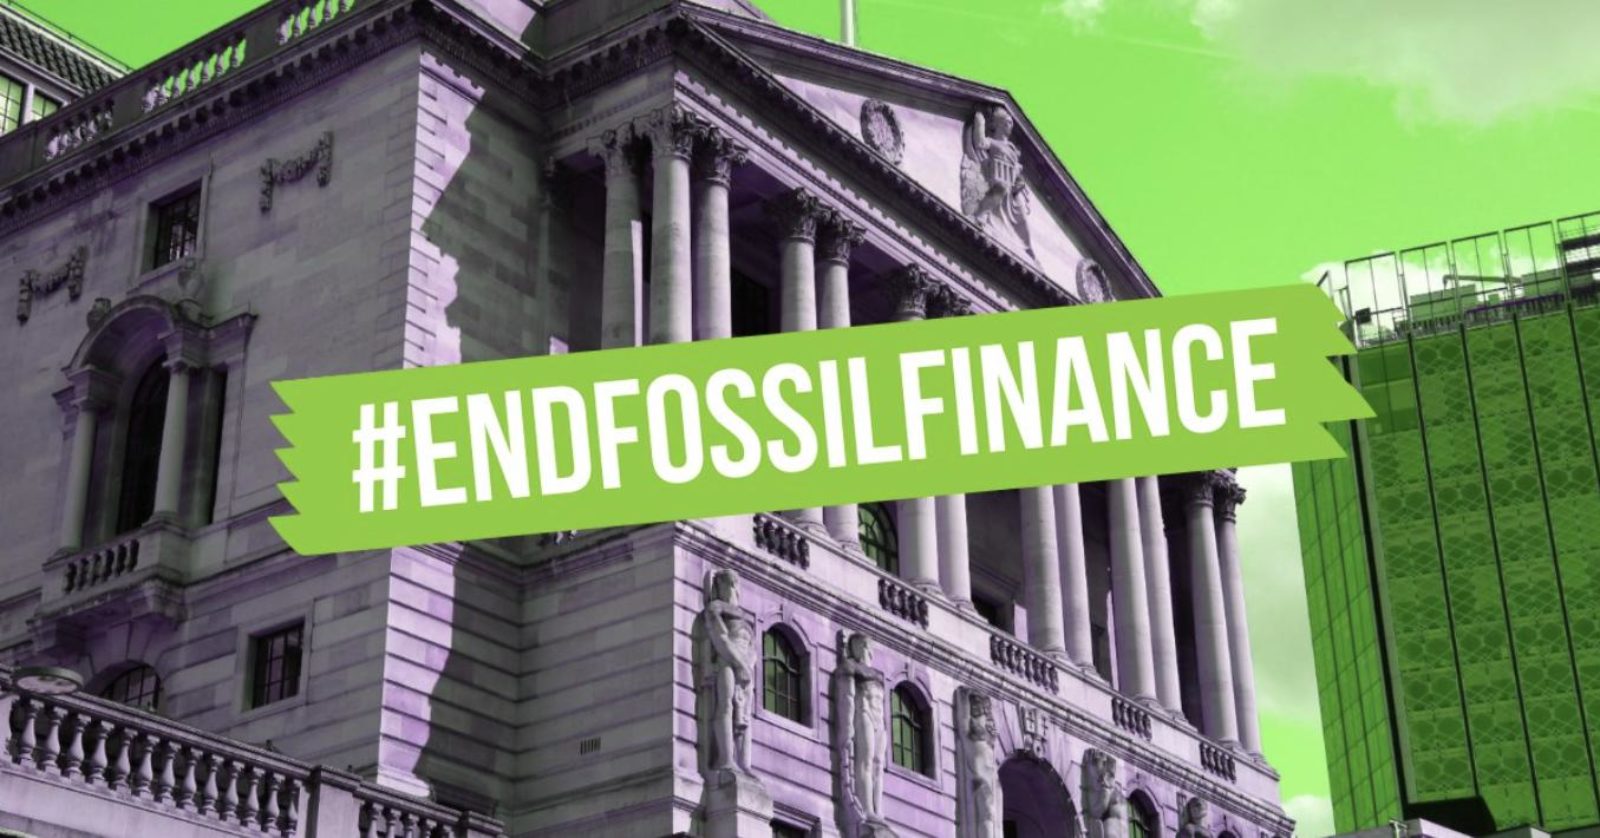 Image shows a bank building with the hashtag "#ENDFOSSILFINANCE" written over the top